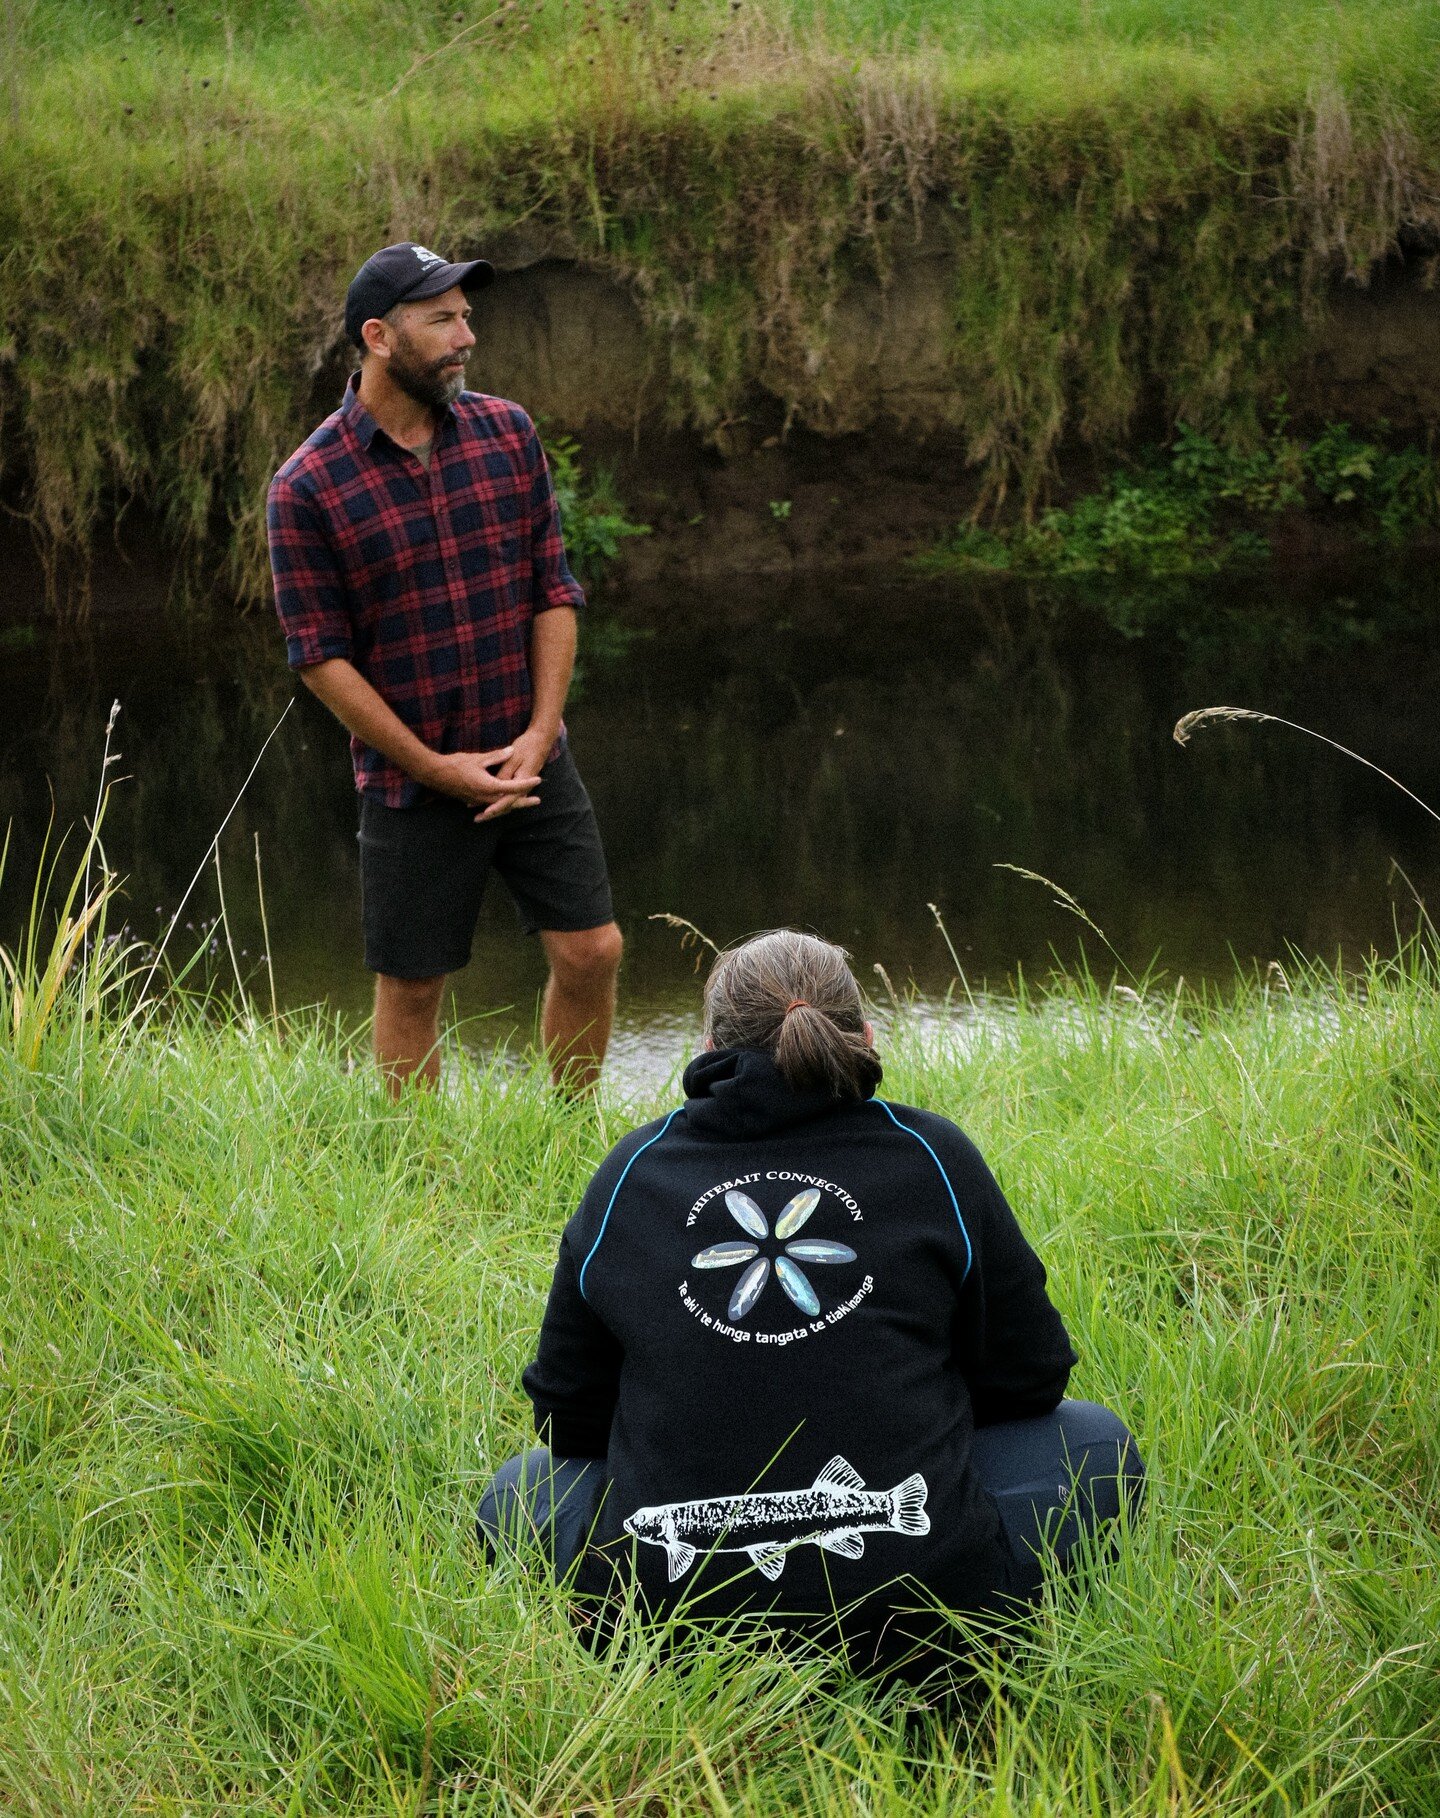 Awesome to be sharing knowledge on-site with @whitebaitconnection and local kaitiaki 🌳 Here's Dave discussing native planting at an inanga (native fish) spawning site 🐟 

📷 @haleygielen